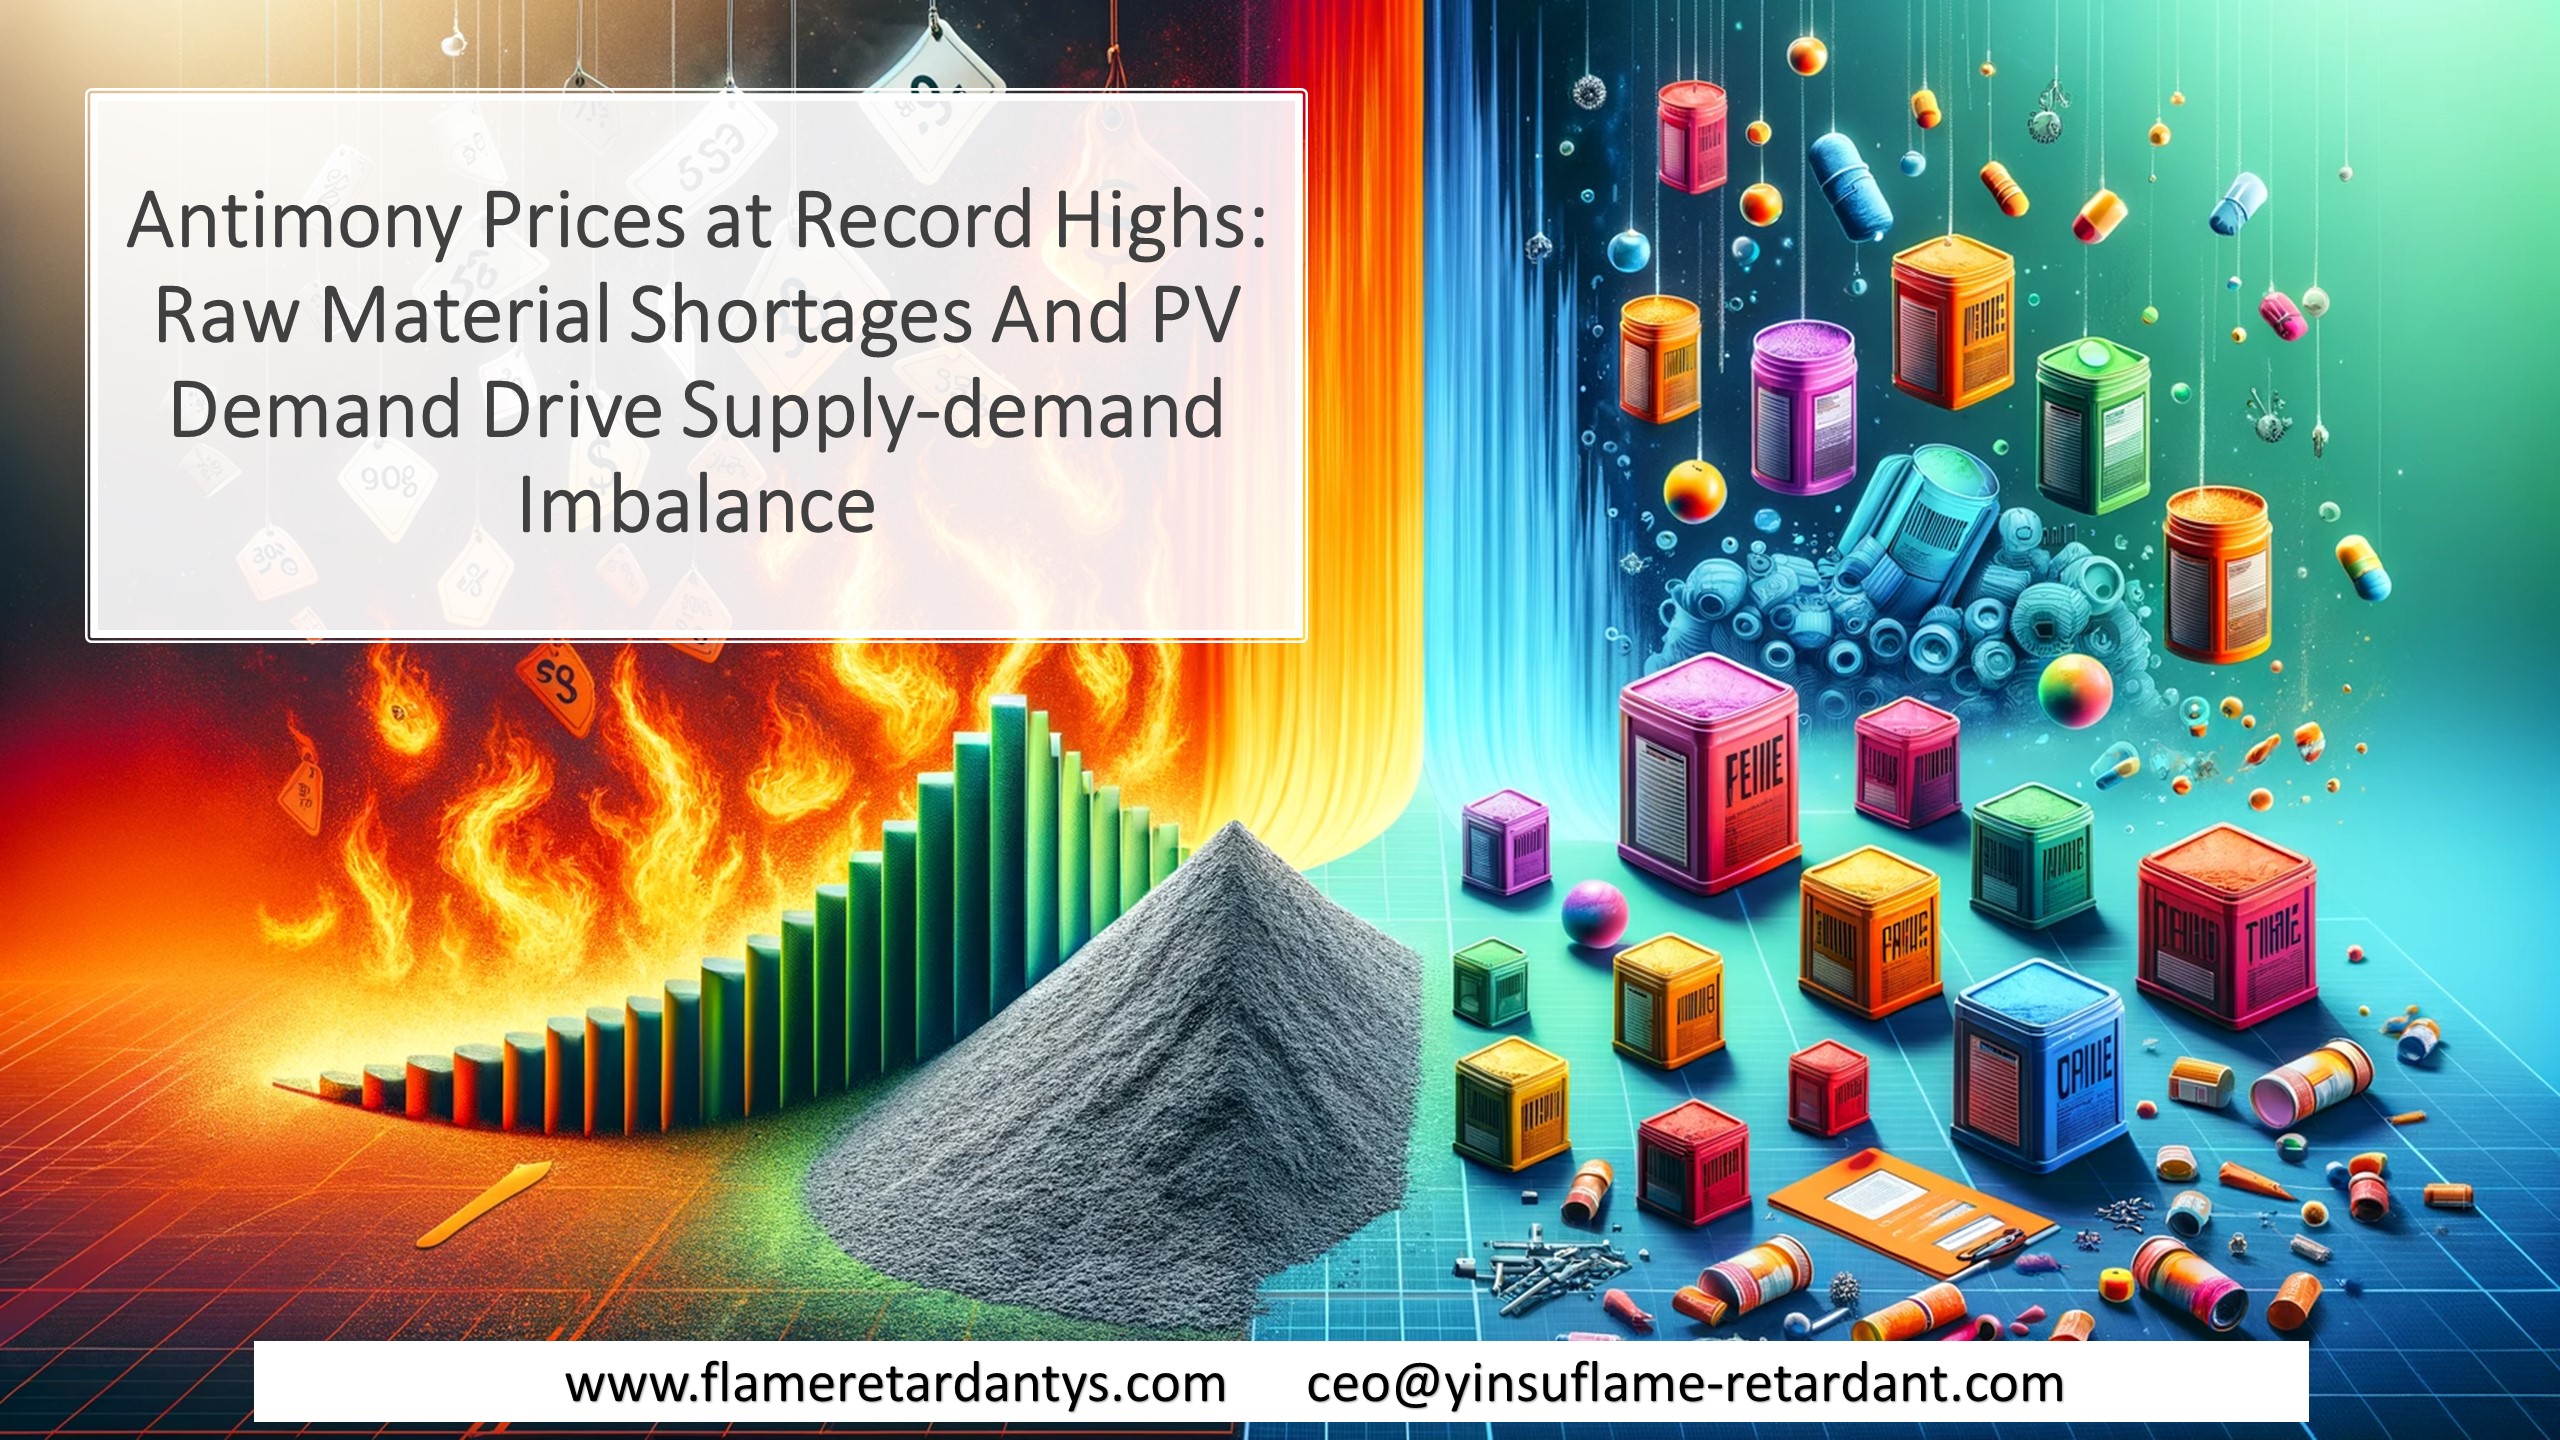 Antimony Prices at Record Highs Raw Material Shortages And PV Demand Drive Supply-demand Imbalance